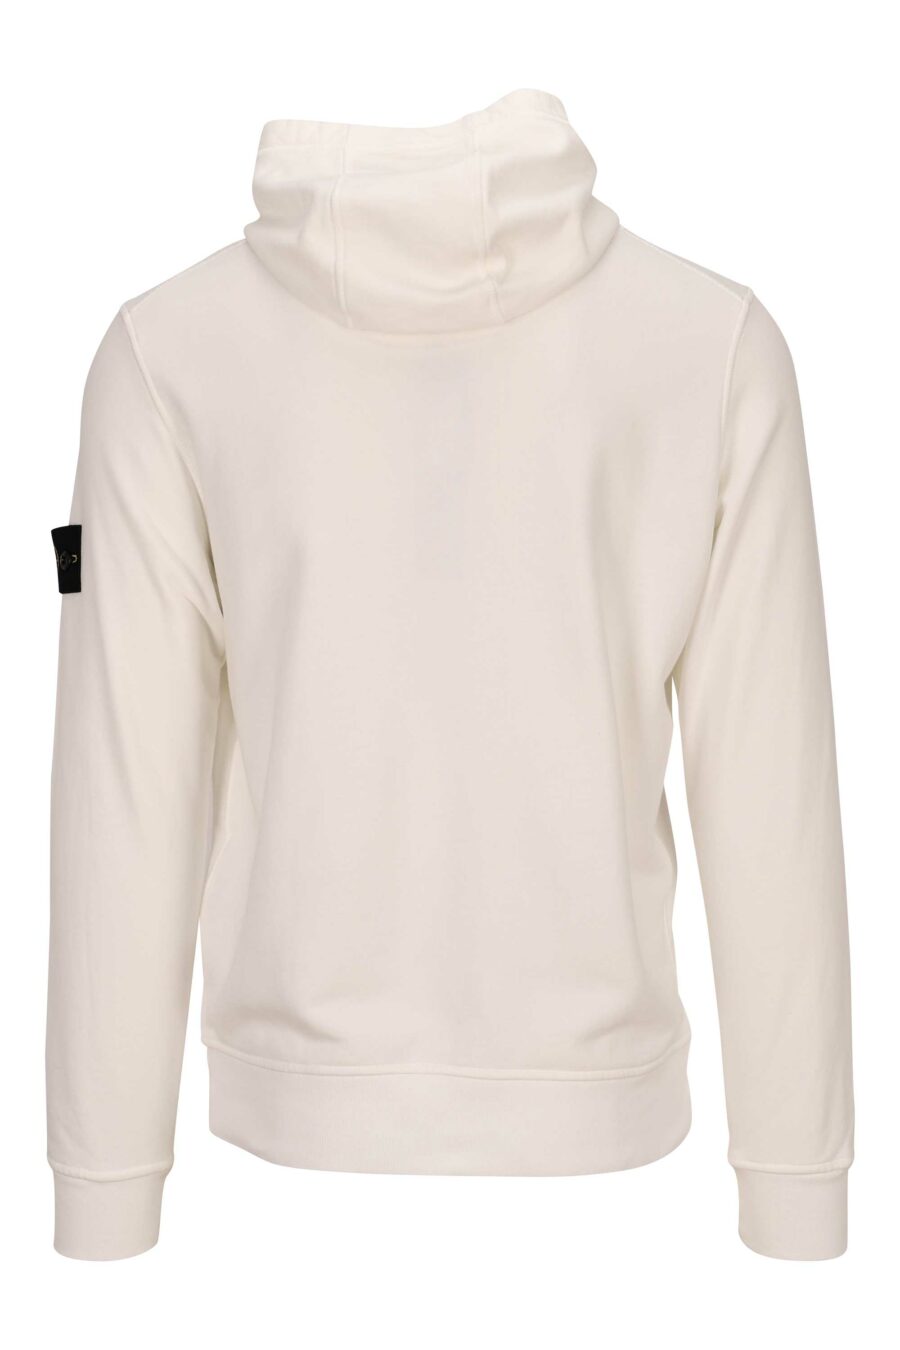 Stone Island - White hooded sweatshirt with compass logo patch - BLS Fashion